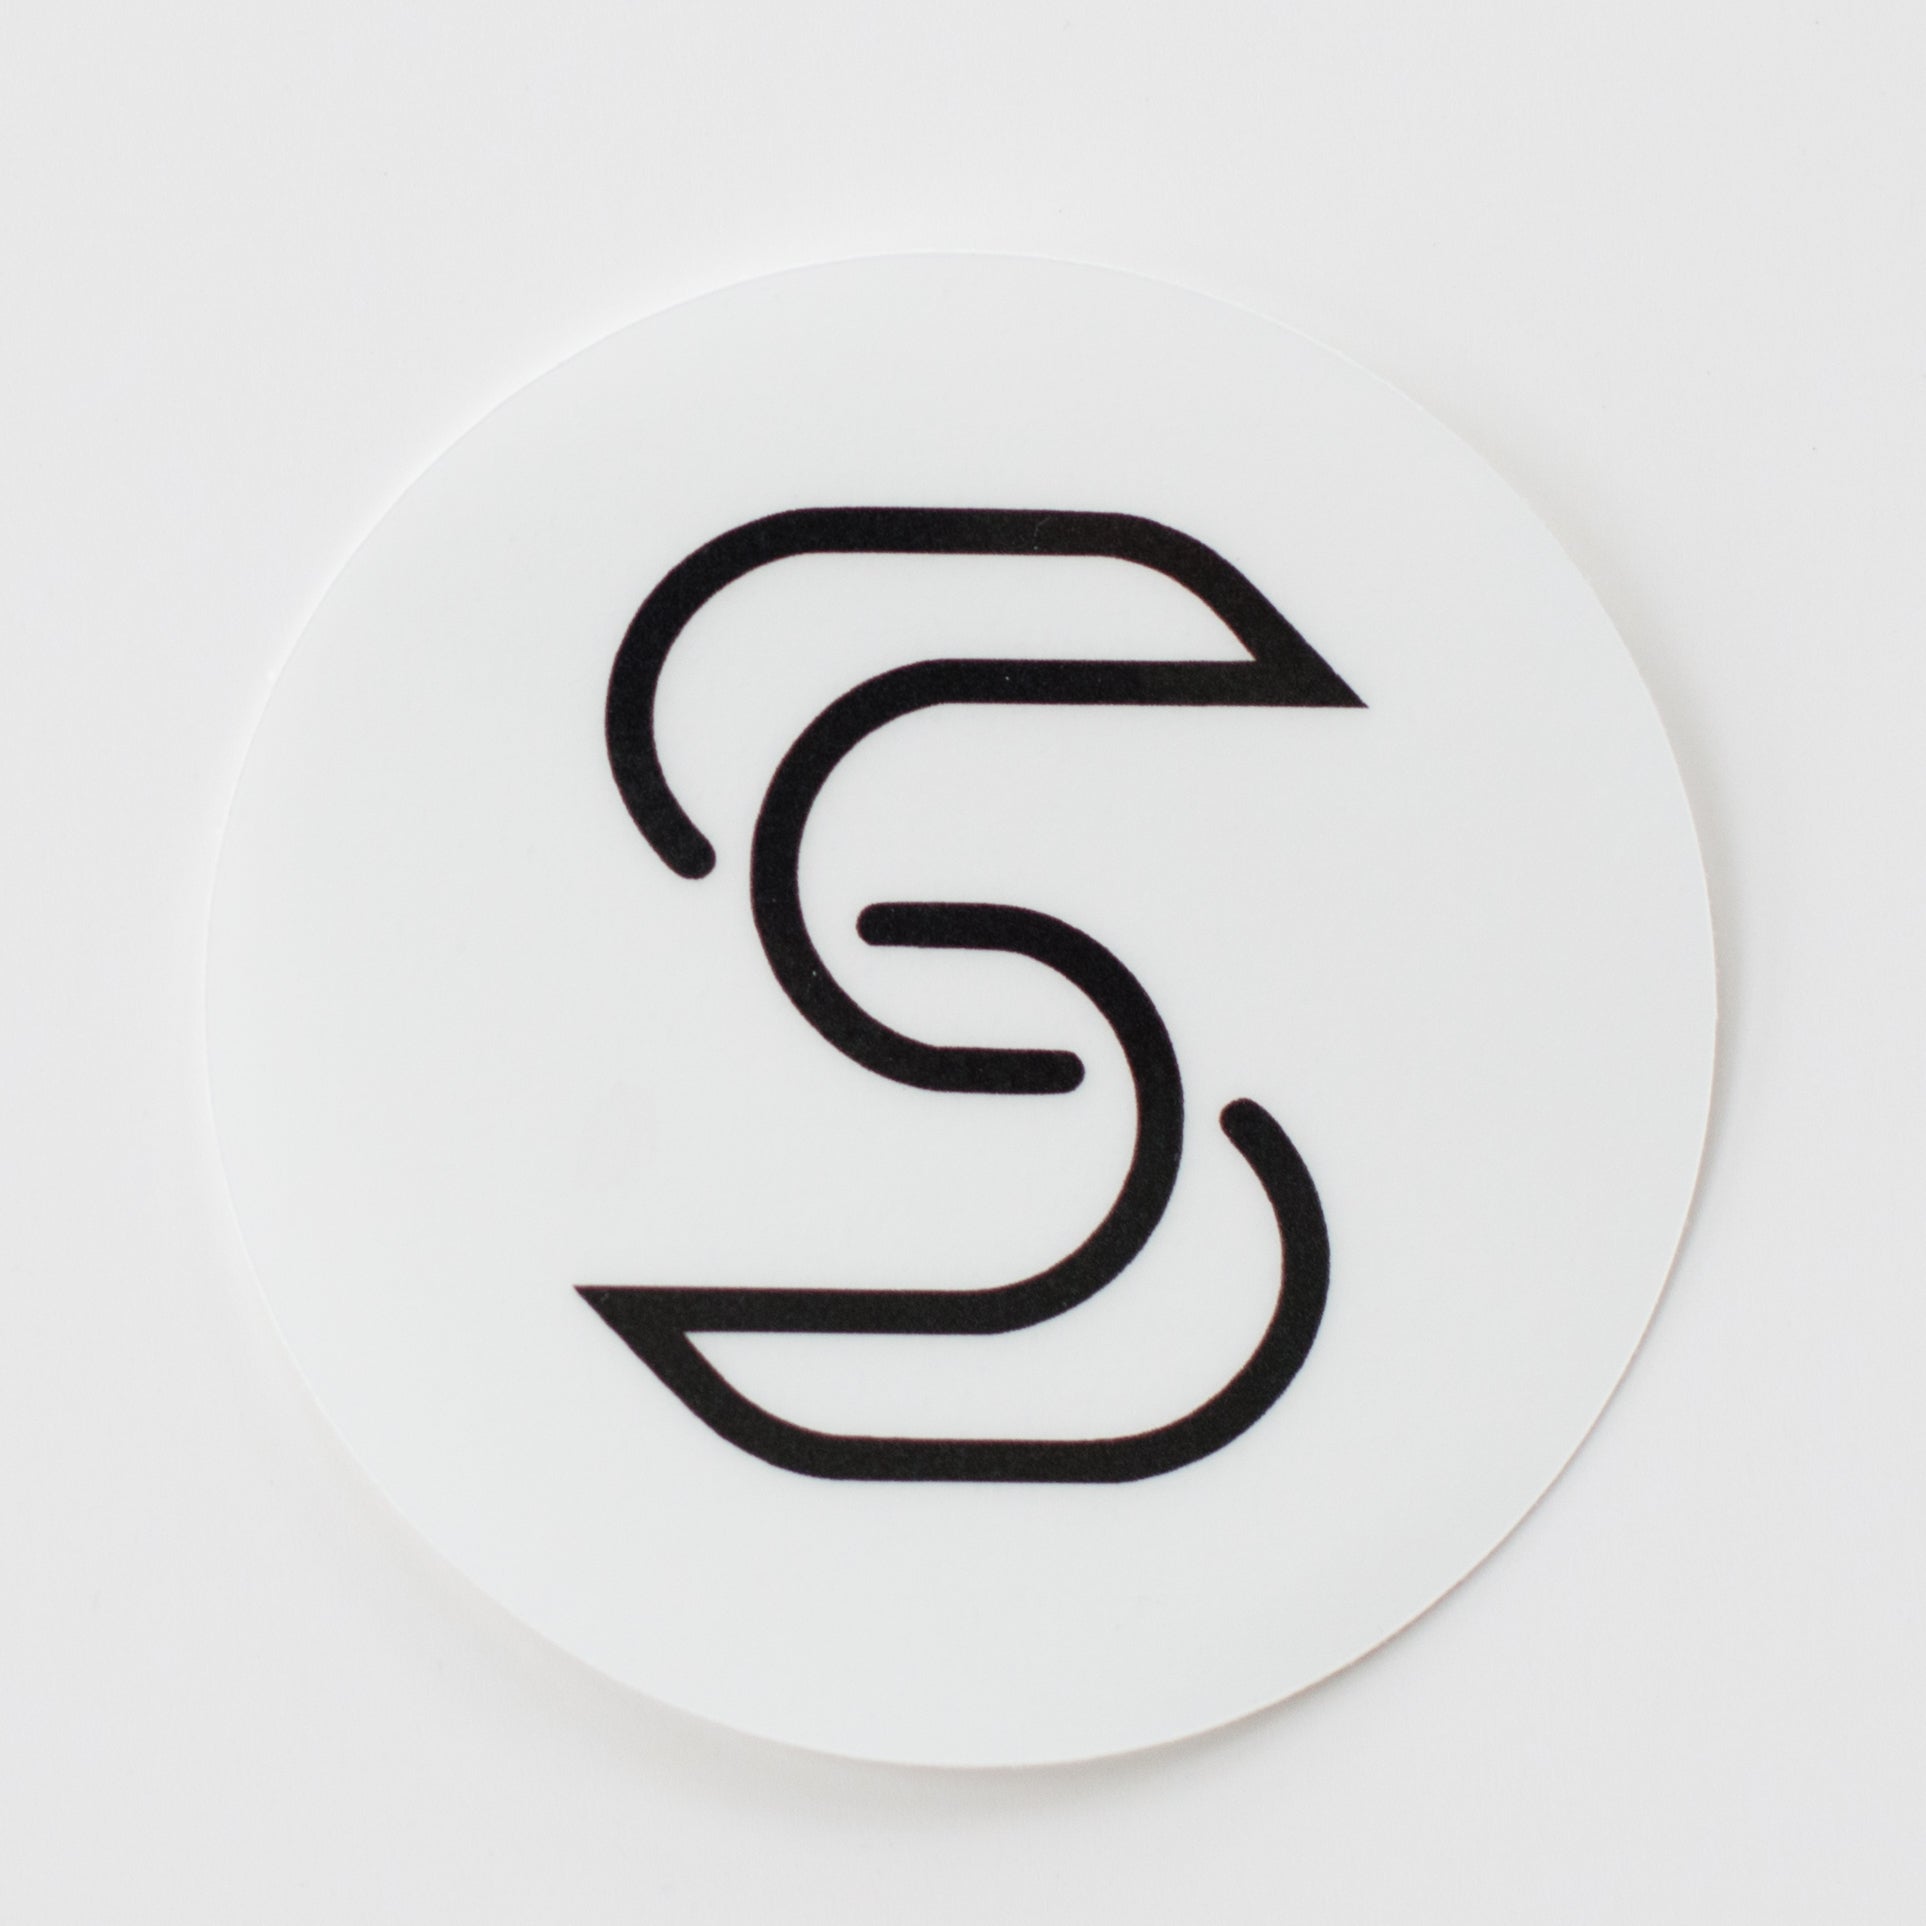 A circular, clear sticker of a black Stickr logo in front of a white background